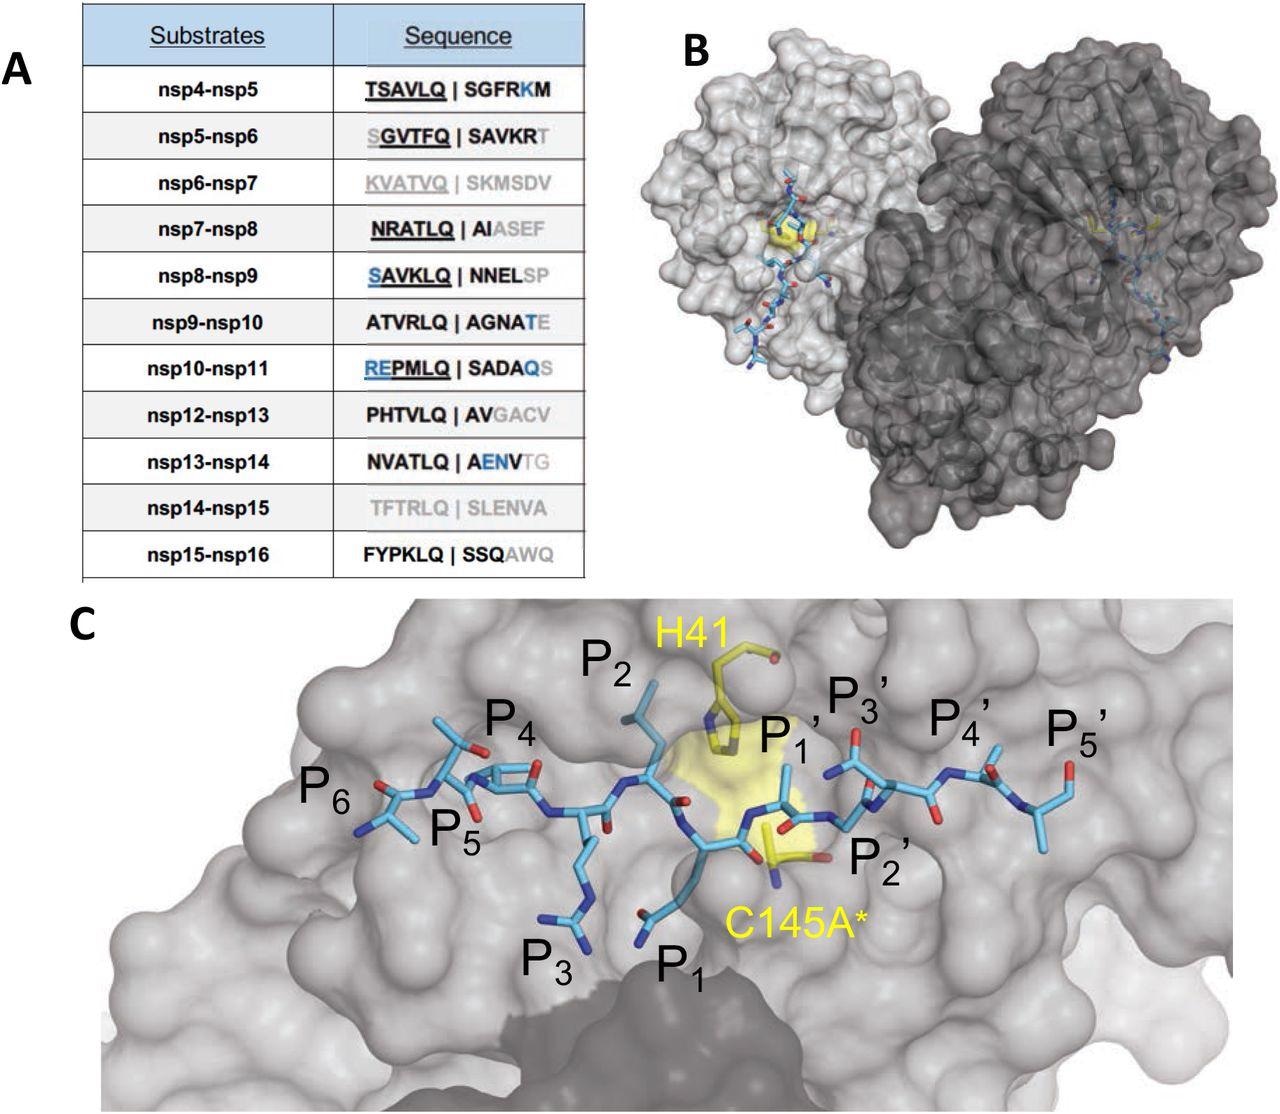 The amino acid sequences and binding of substrates to SARS-CoV-2 Mpro active site. (A) Viral polyprotein cleavage sites processed by Mpro to release non-structural proteins (nsp). The one-letter amino acid codes of cleavage site sequences, where bold letters indicate fully resolved residues and blue are stubbed side chains in the cocrystal structures. Underlined N-terminal sequences correspond to product complexes with independently determined cocrystal structures. (B) Crystal structure of SARS-CoV-2 Mpro with a substrate peptide (nsp9-nsp10) bound at the active site of both monomers (light and darker gray). The peptide is depicted as cyan sticks and the catalytic dyad is colored yellow. (C) Close-up view of one of the active sites in panel B, with the protease in surface representation. The asterisk indicates catalytic cysteine was mutated to prevent substrate cleavage. The cleavage occurs between positions P1 and P1′.